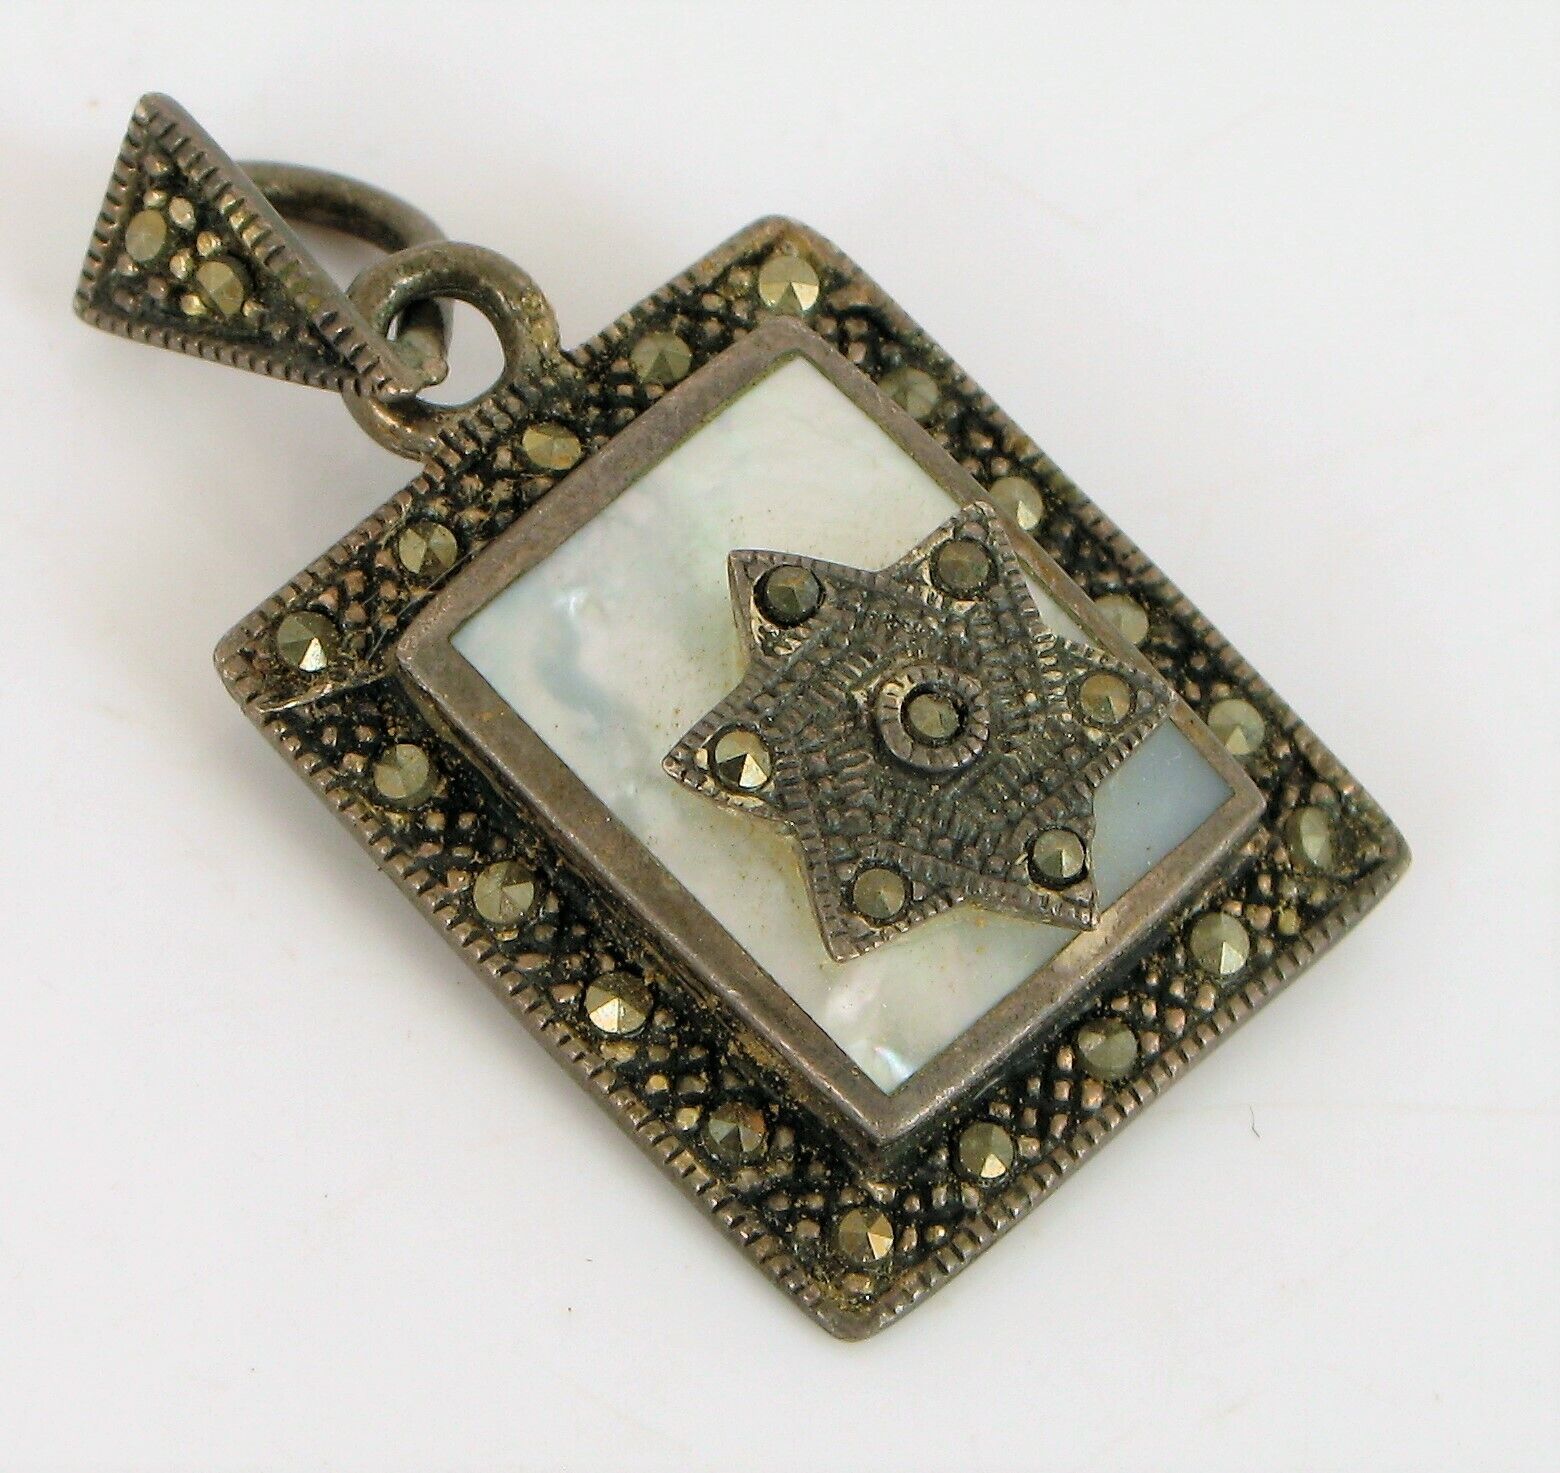 VINTAGE RELIGIOUS PENDANT JEWISH STAR OF DAVID MOTHER OF PEARL PENDANT MARCASITE